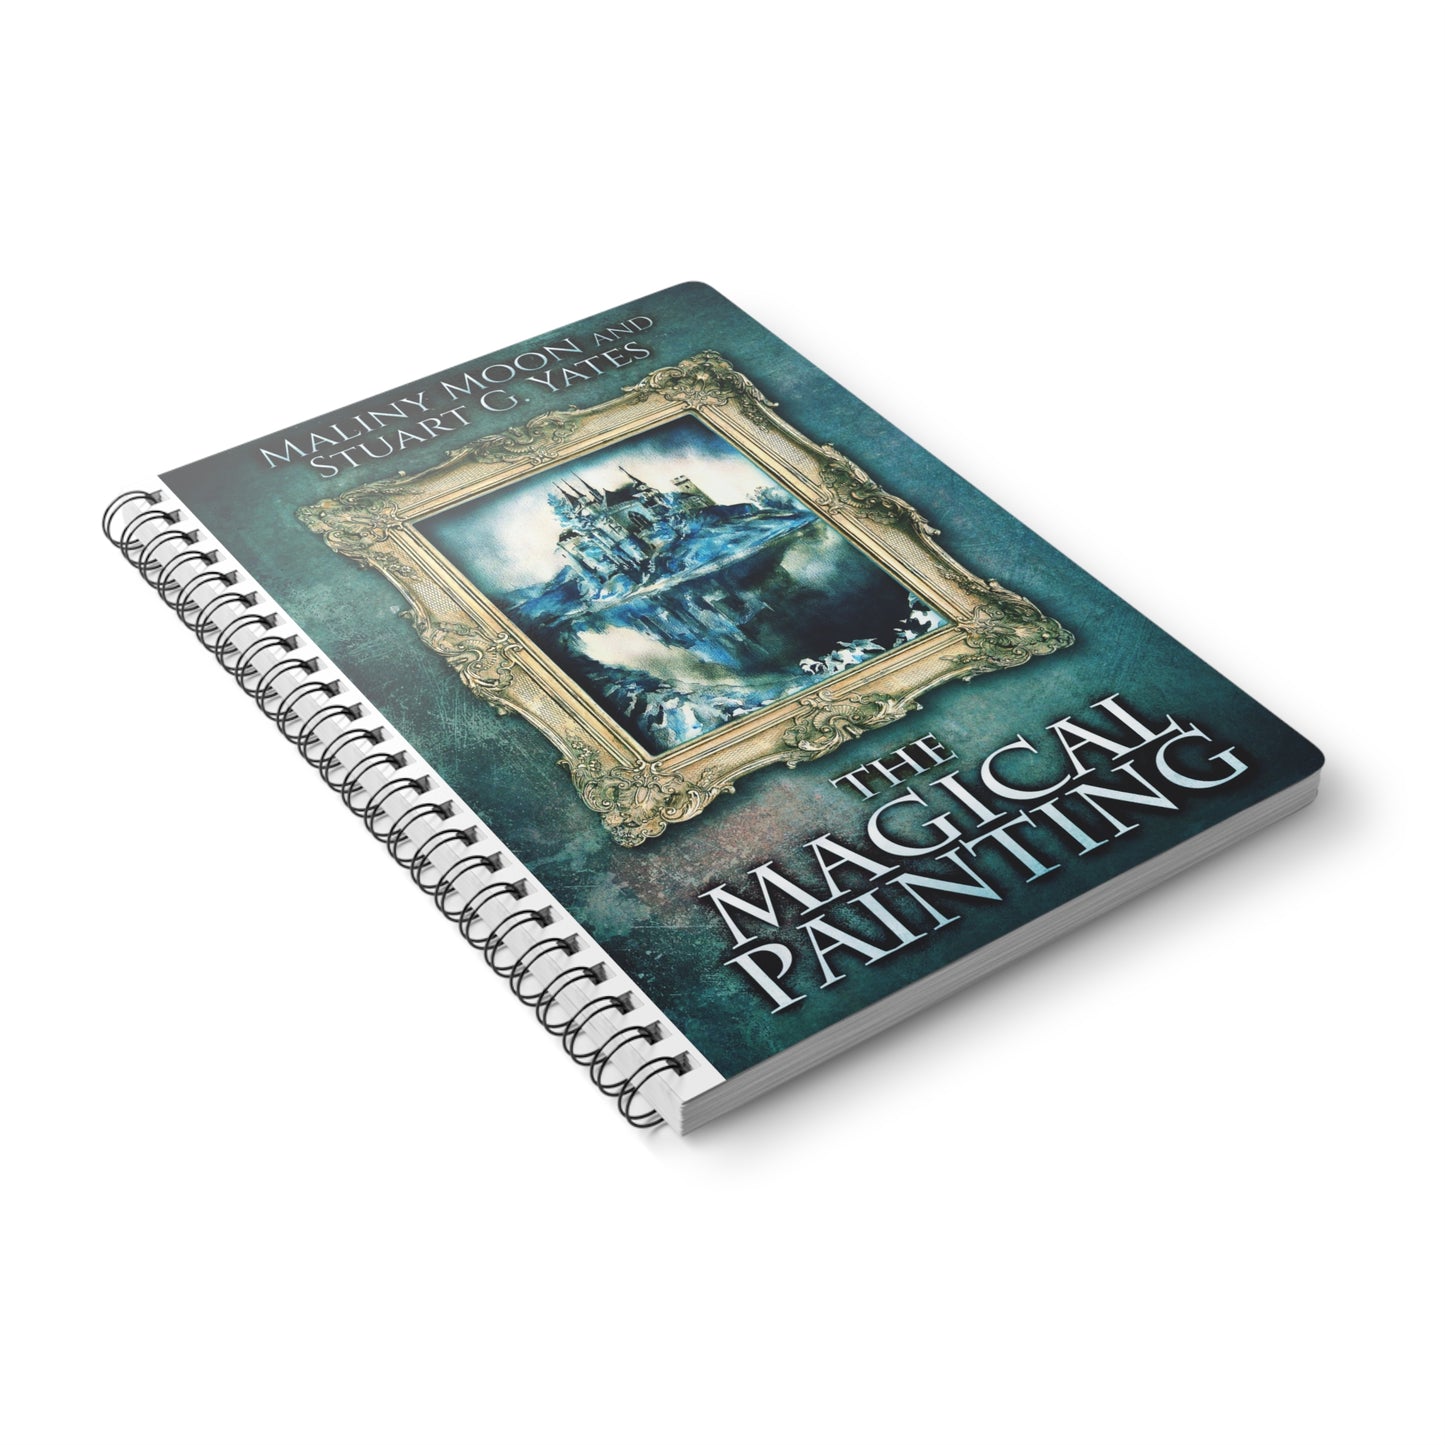 The Magical Painting - A5 Wirebound Notebook